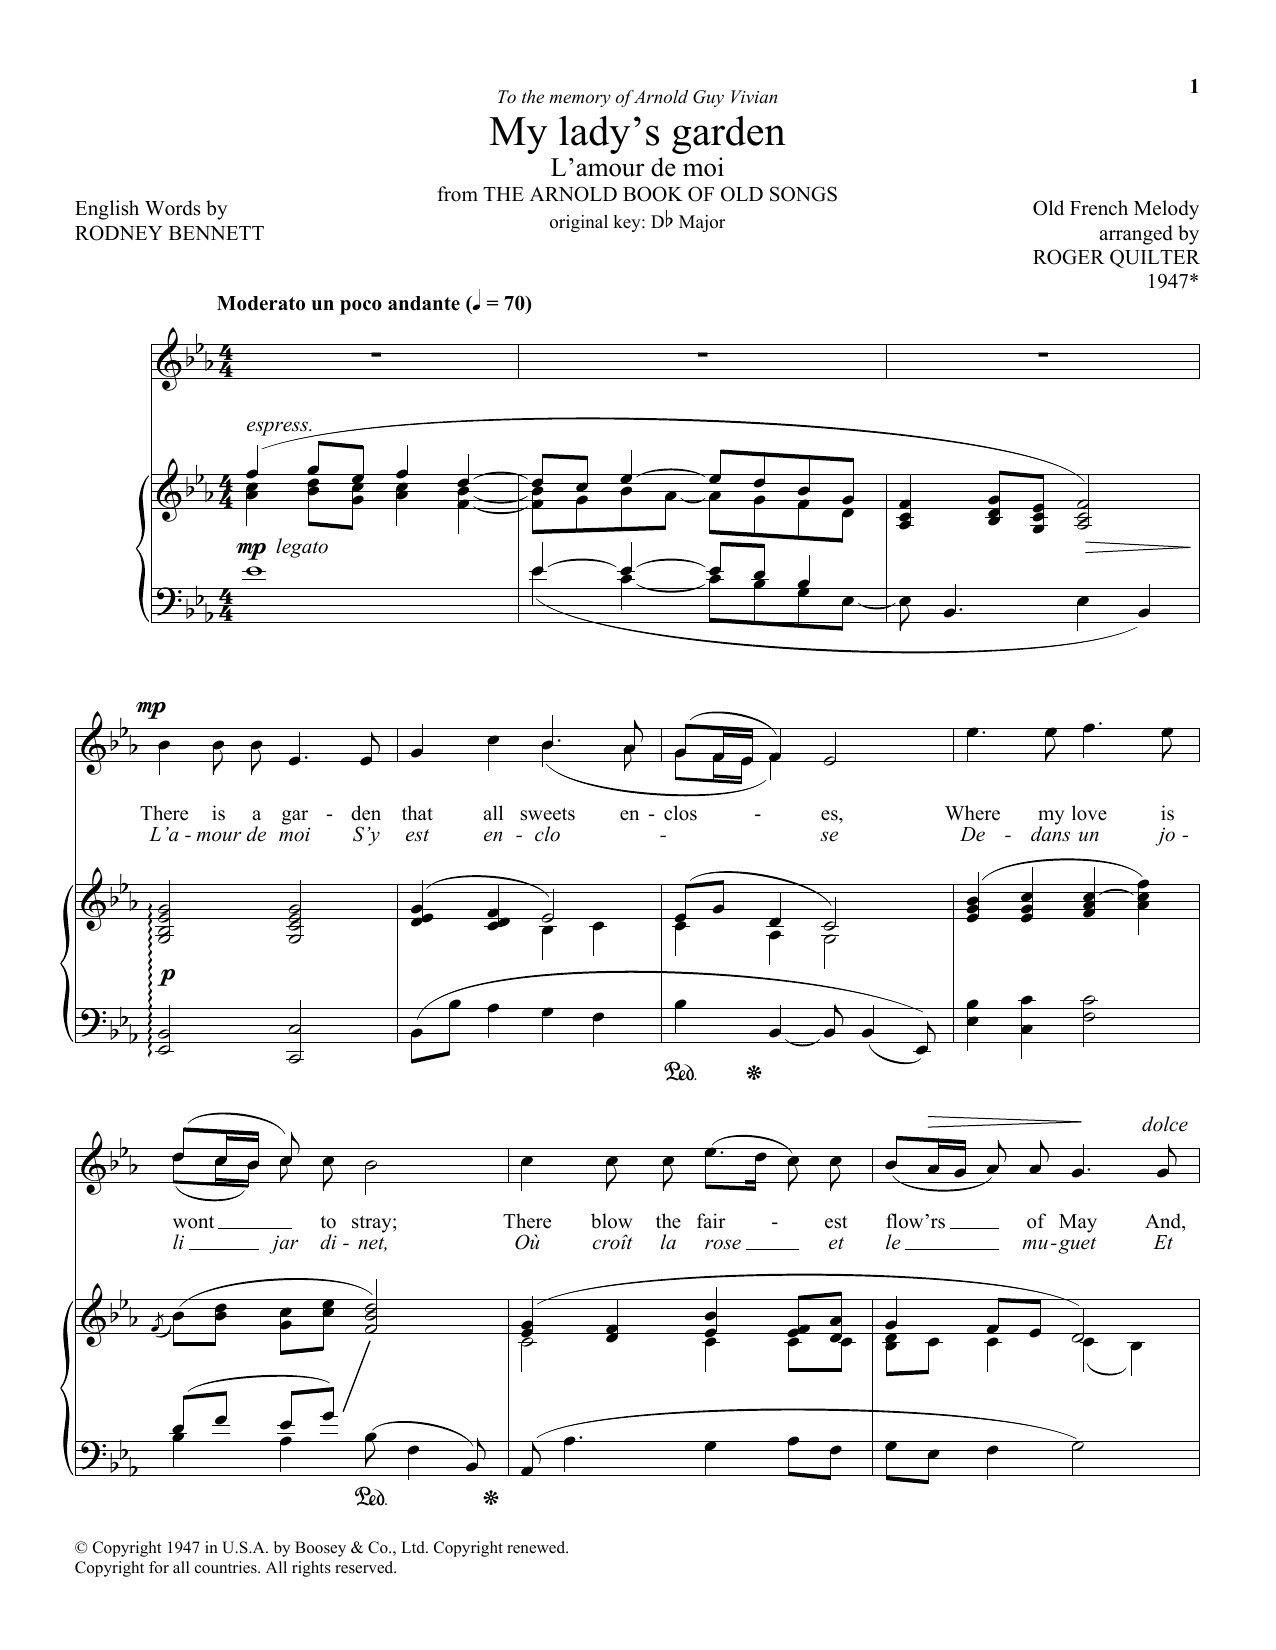 Download Roger Quilter My Lady's Garden (L'amour De Moi) Sheet Music